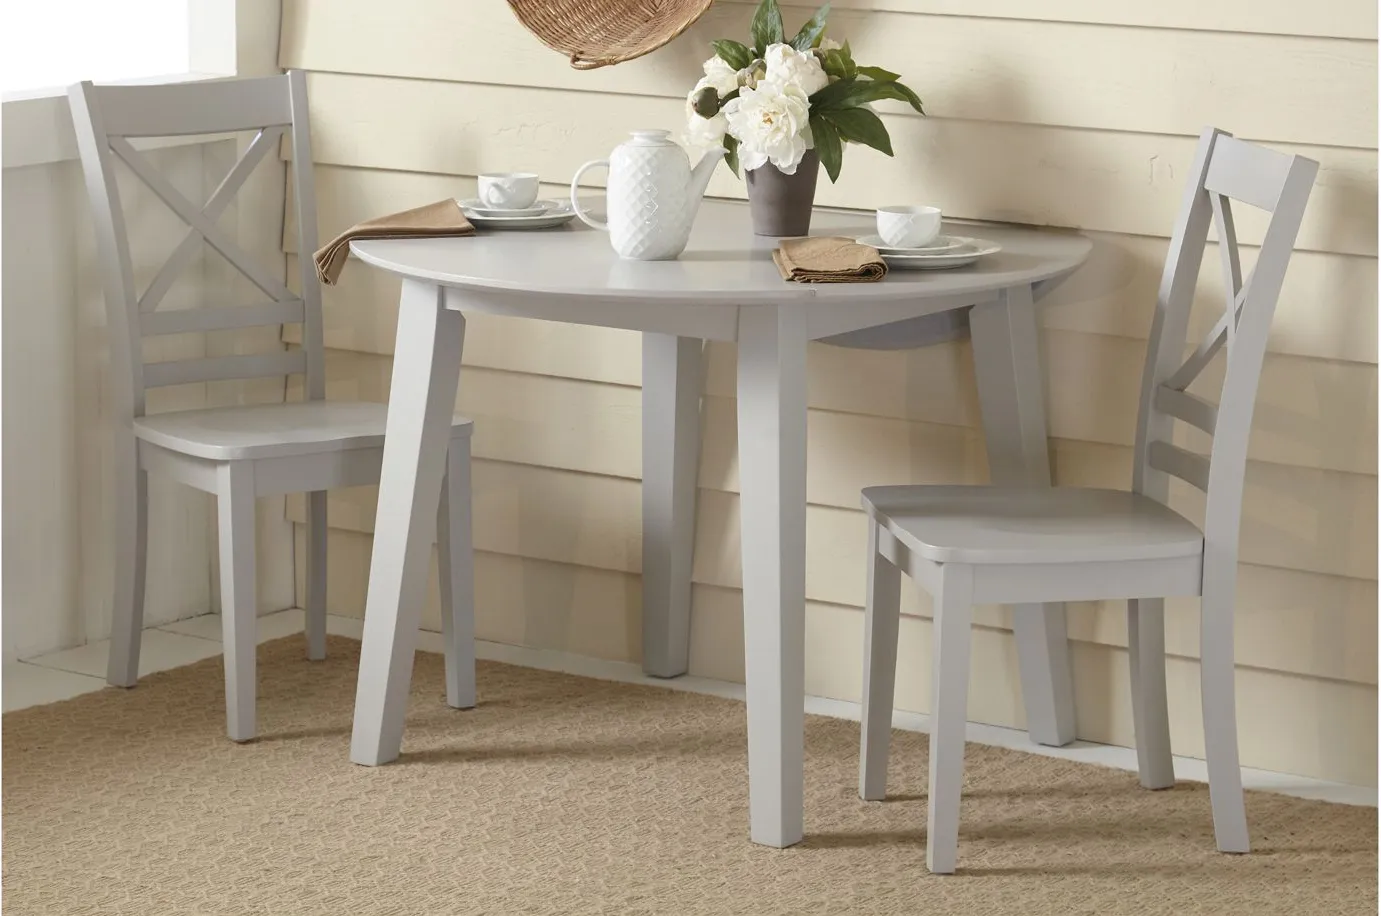 Simplicity 3-pc. Dining Set in Dove by Jofran